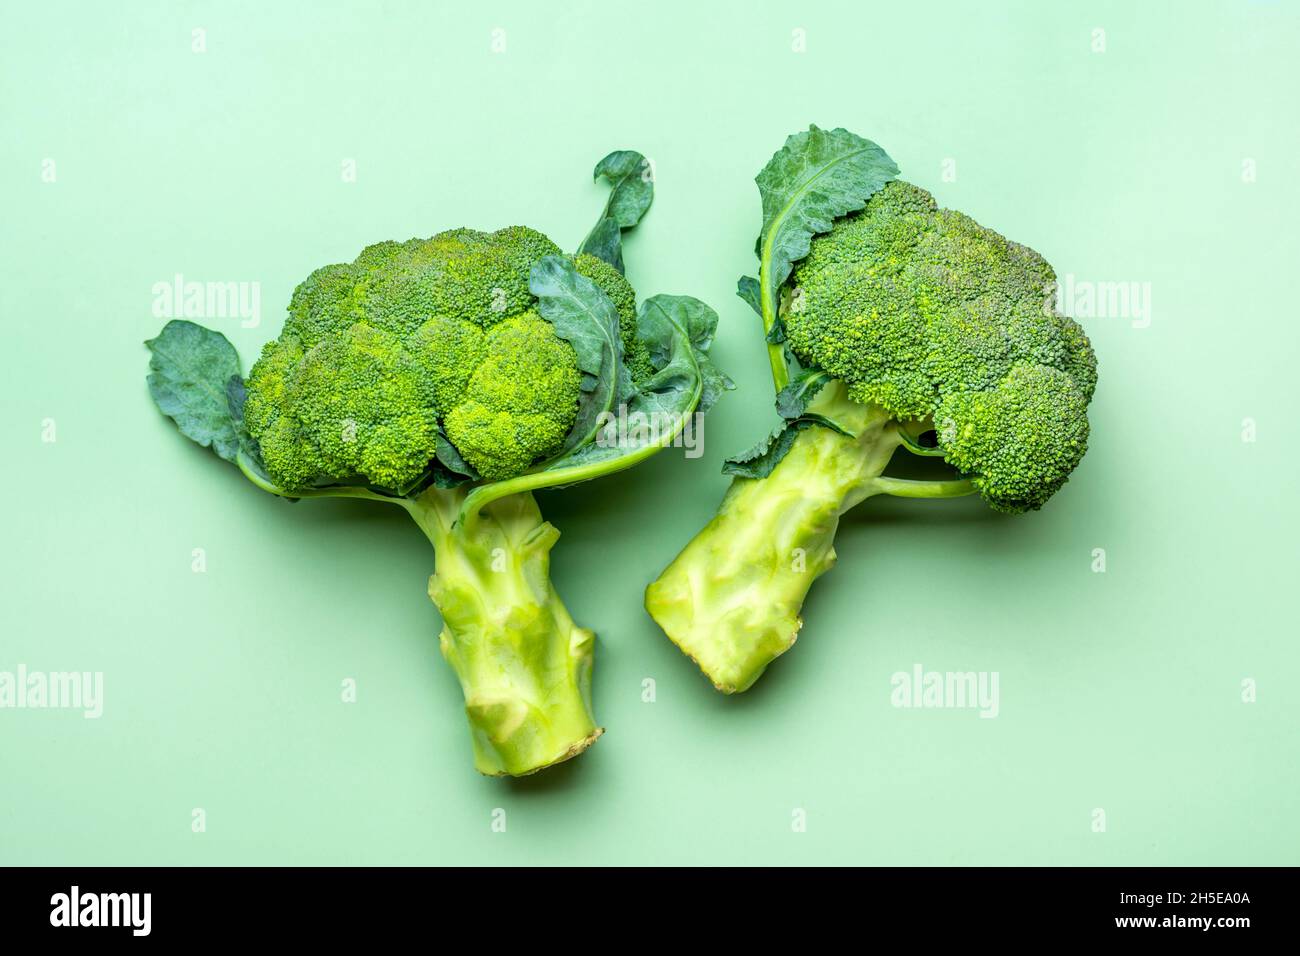 Fresh Harvested cabbage broccoli on trend green background. Vegetables vitamin C Natural Organic broccoli lies on green table Top View Flat Lay. Stock Photo